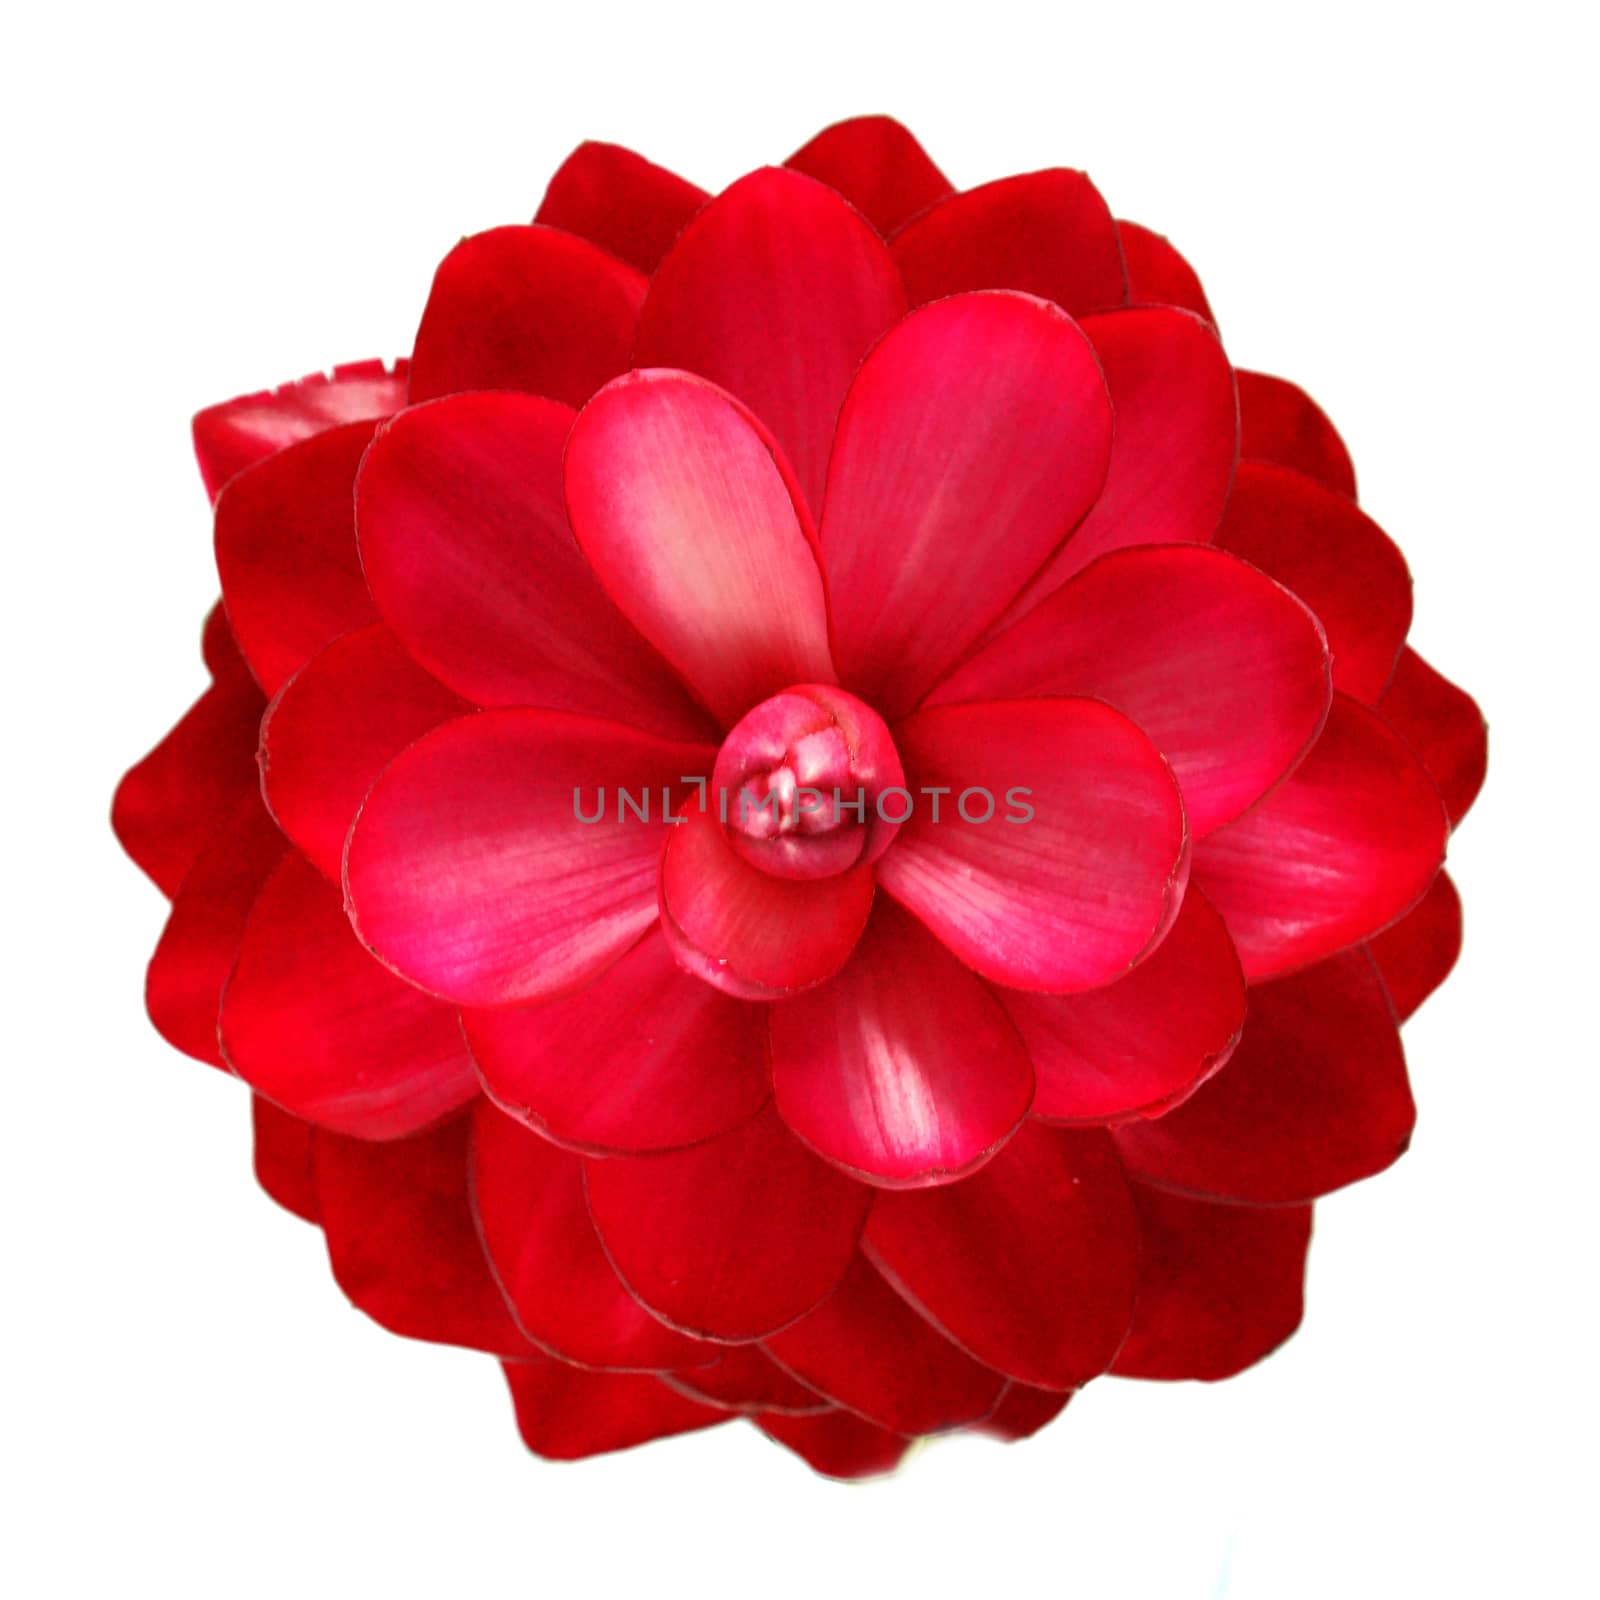 beautiful tropical red ginger flower on isolate white background by Noppharat_th